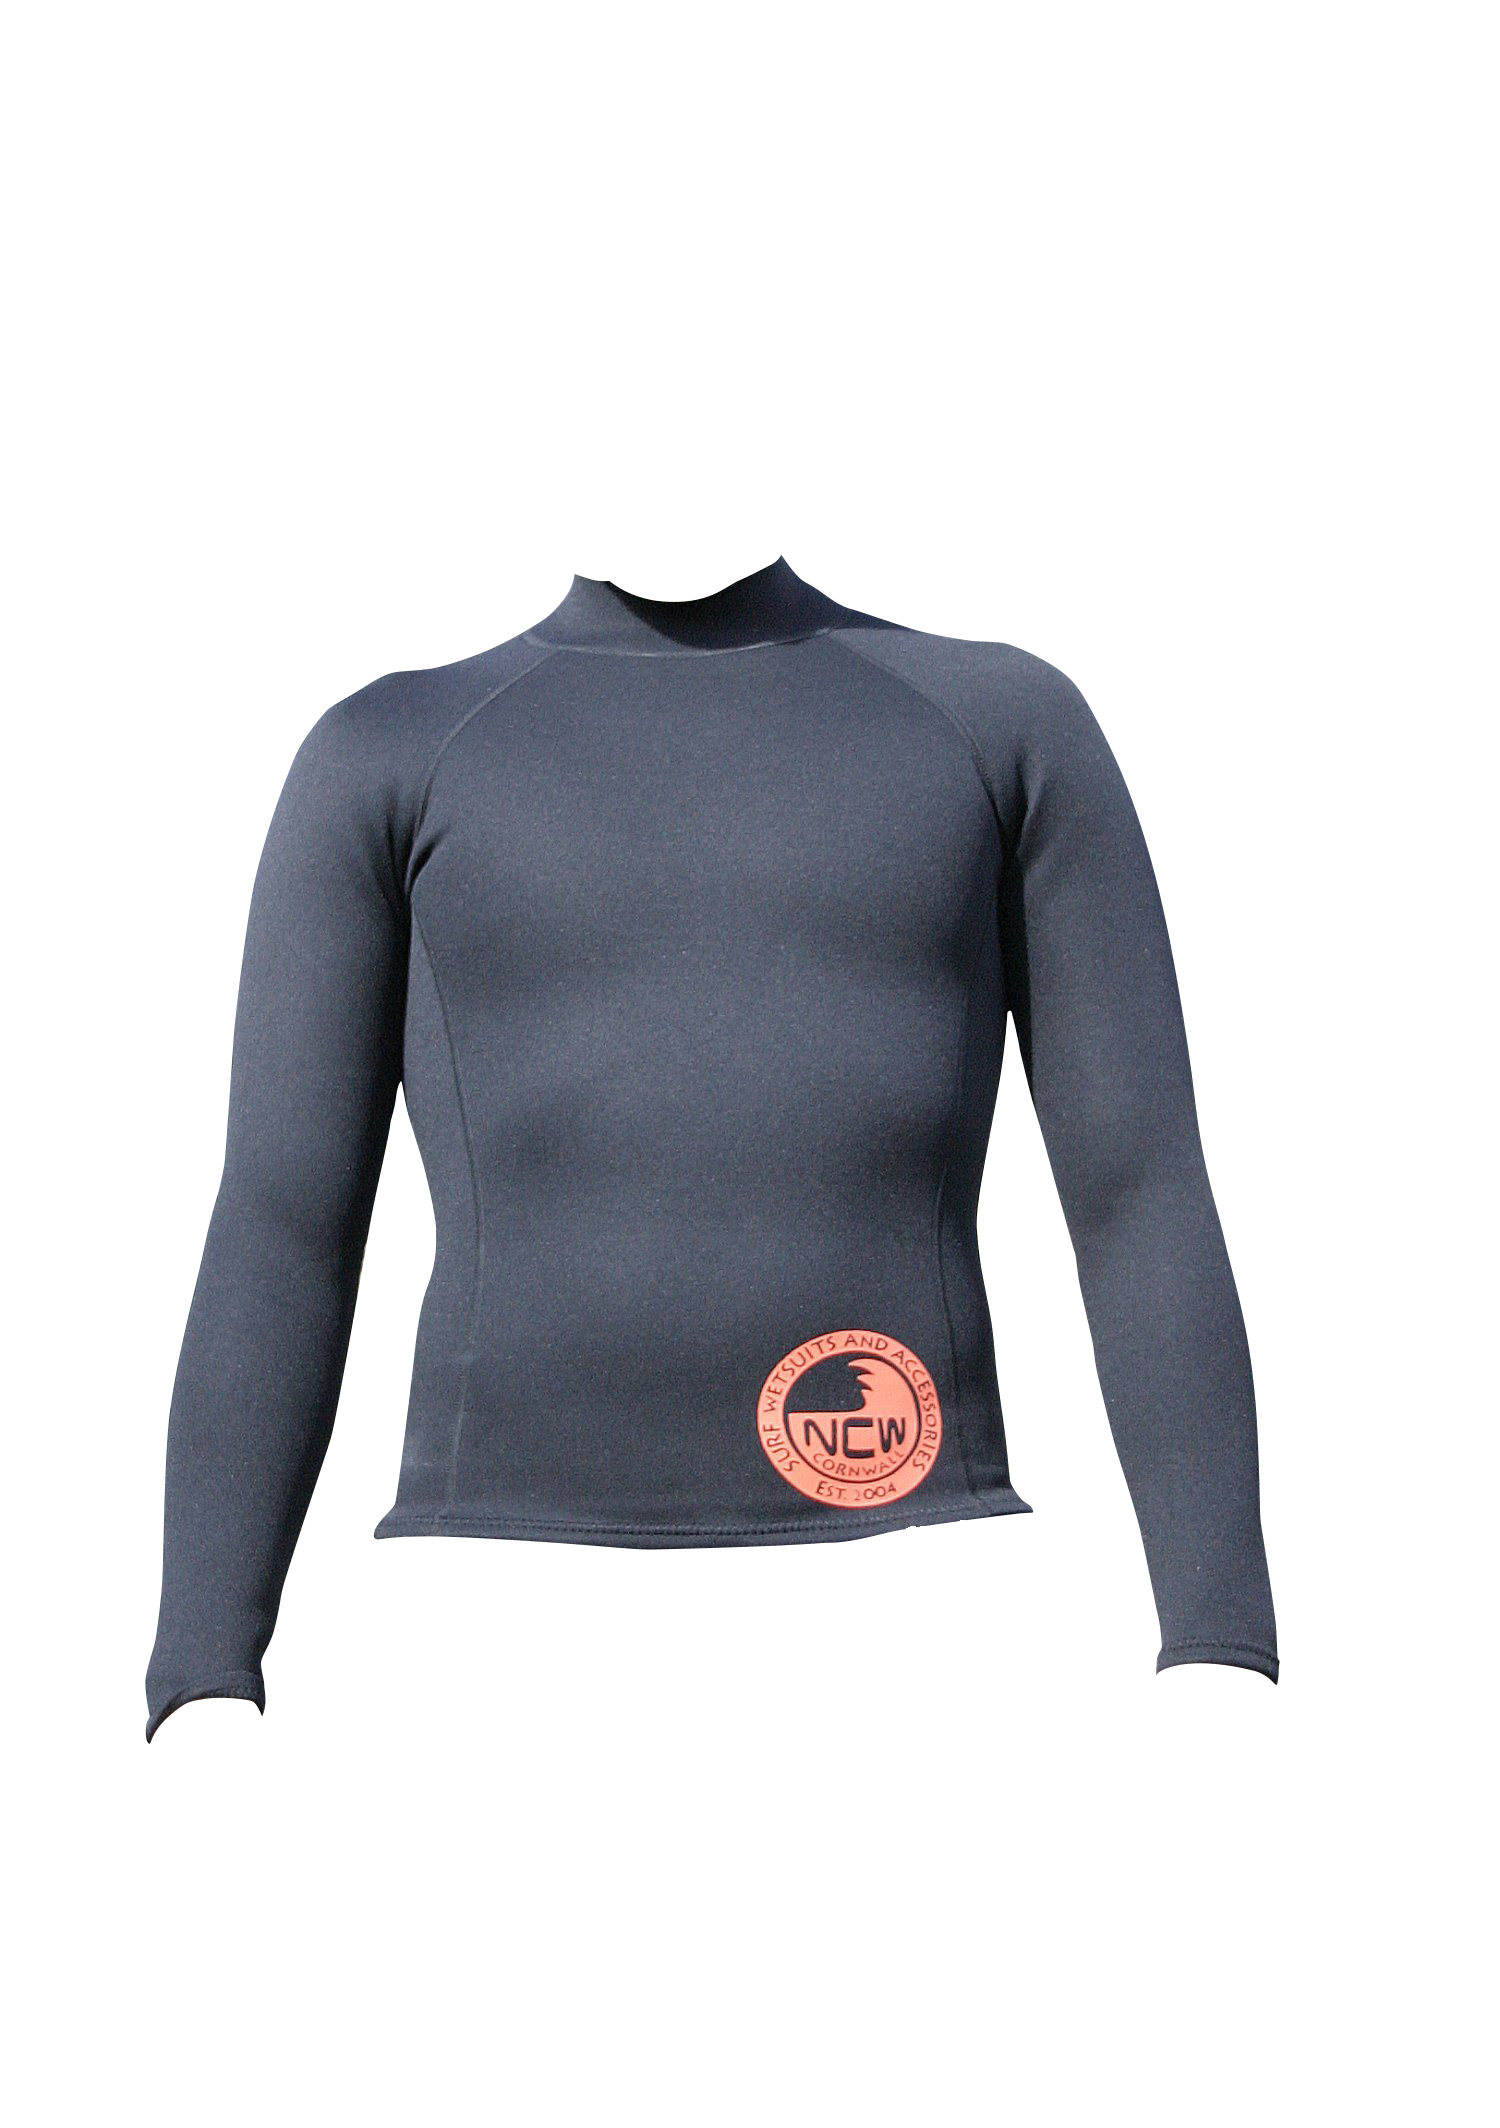 Very Warm Quality product from NCW CORNWALL 1.5 mm Thermal Hooded Long Sleeve Rash Vest 